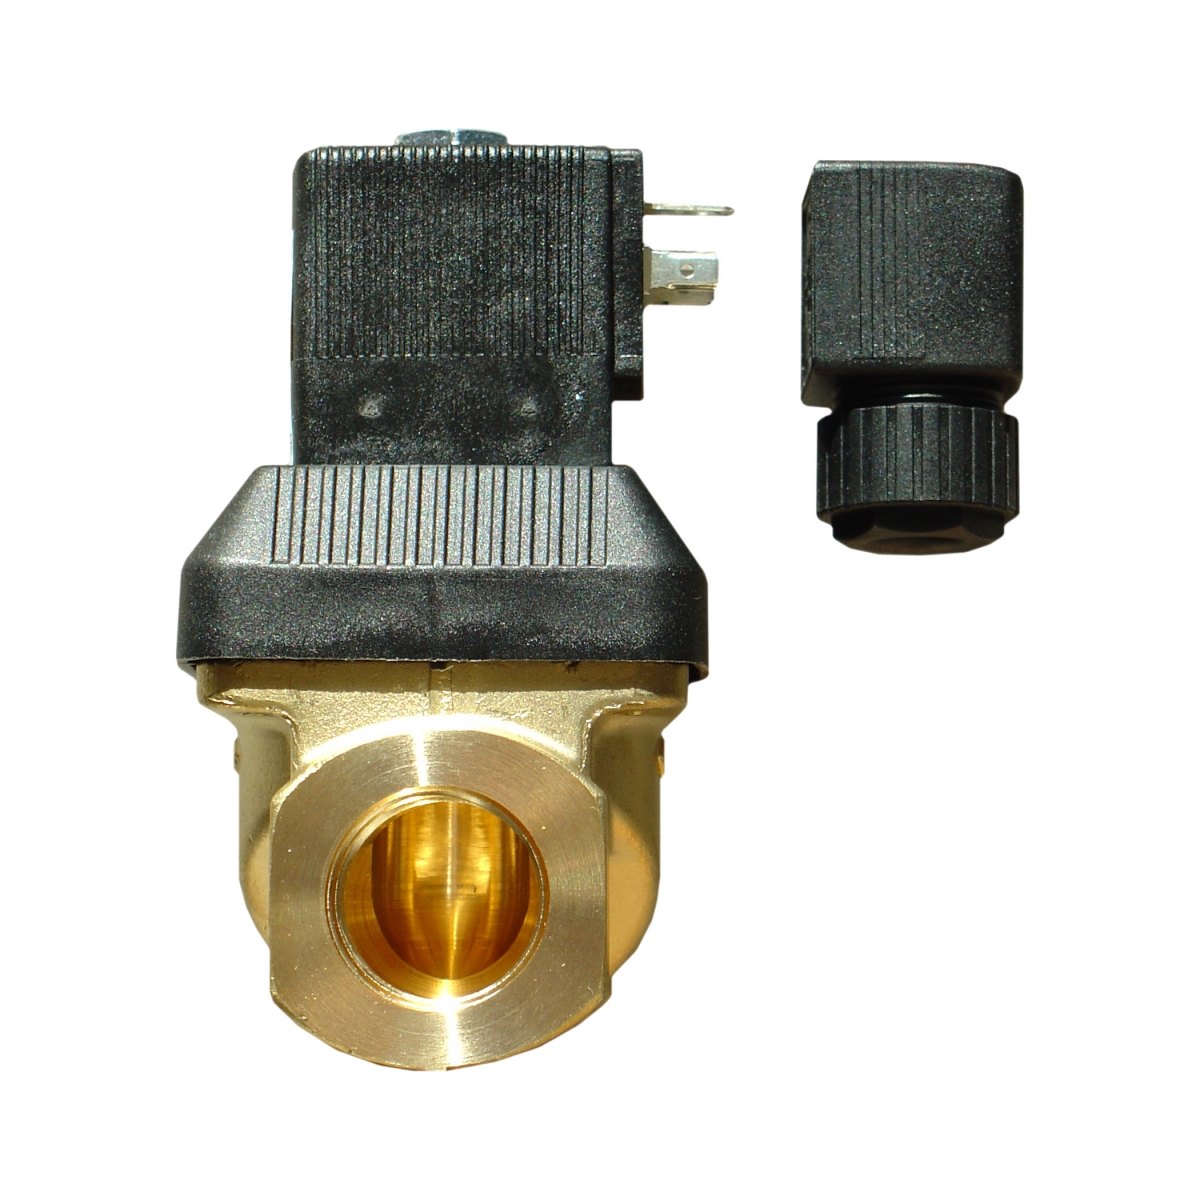 High quality solenoid valve made of brass ½“, 230VAC, normally closed High quality solenoid valve made of brass ½“, 230VAC, normally closed